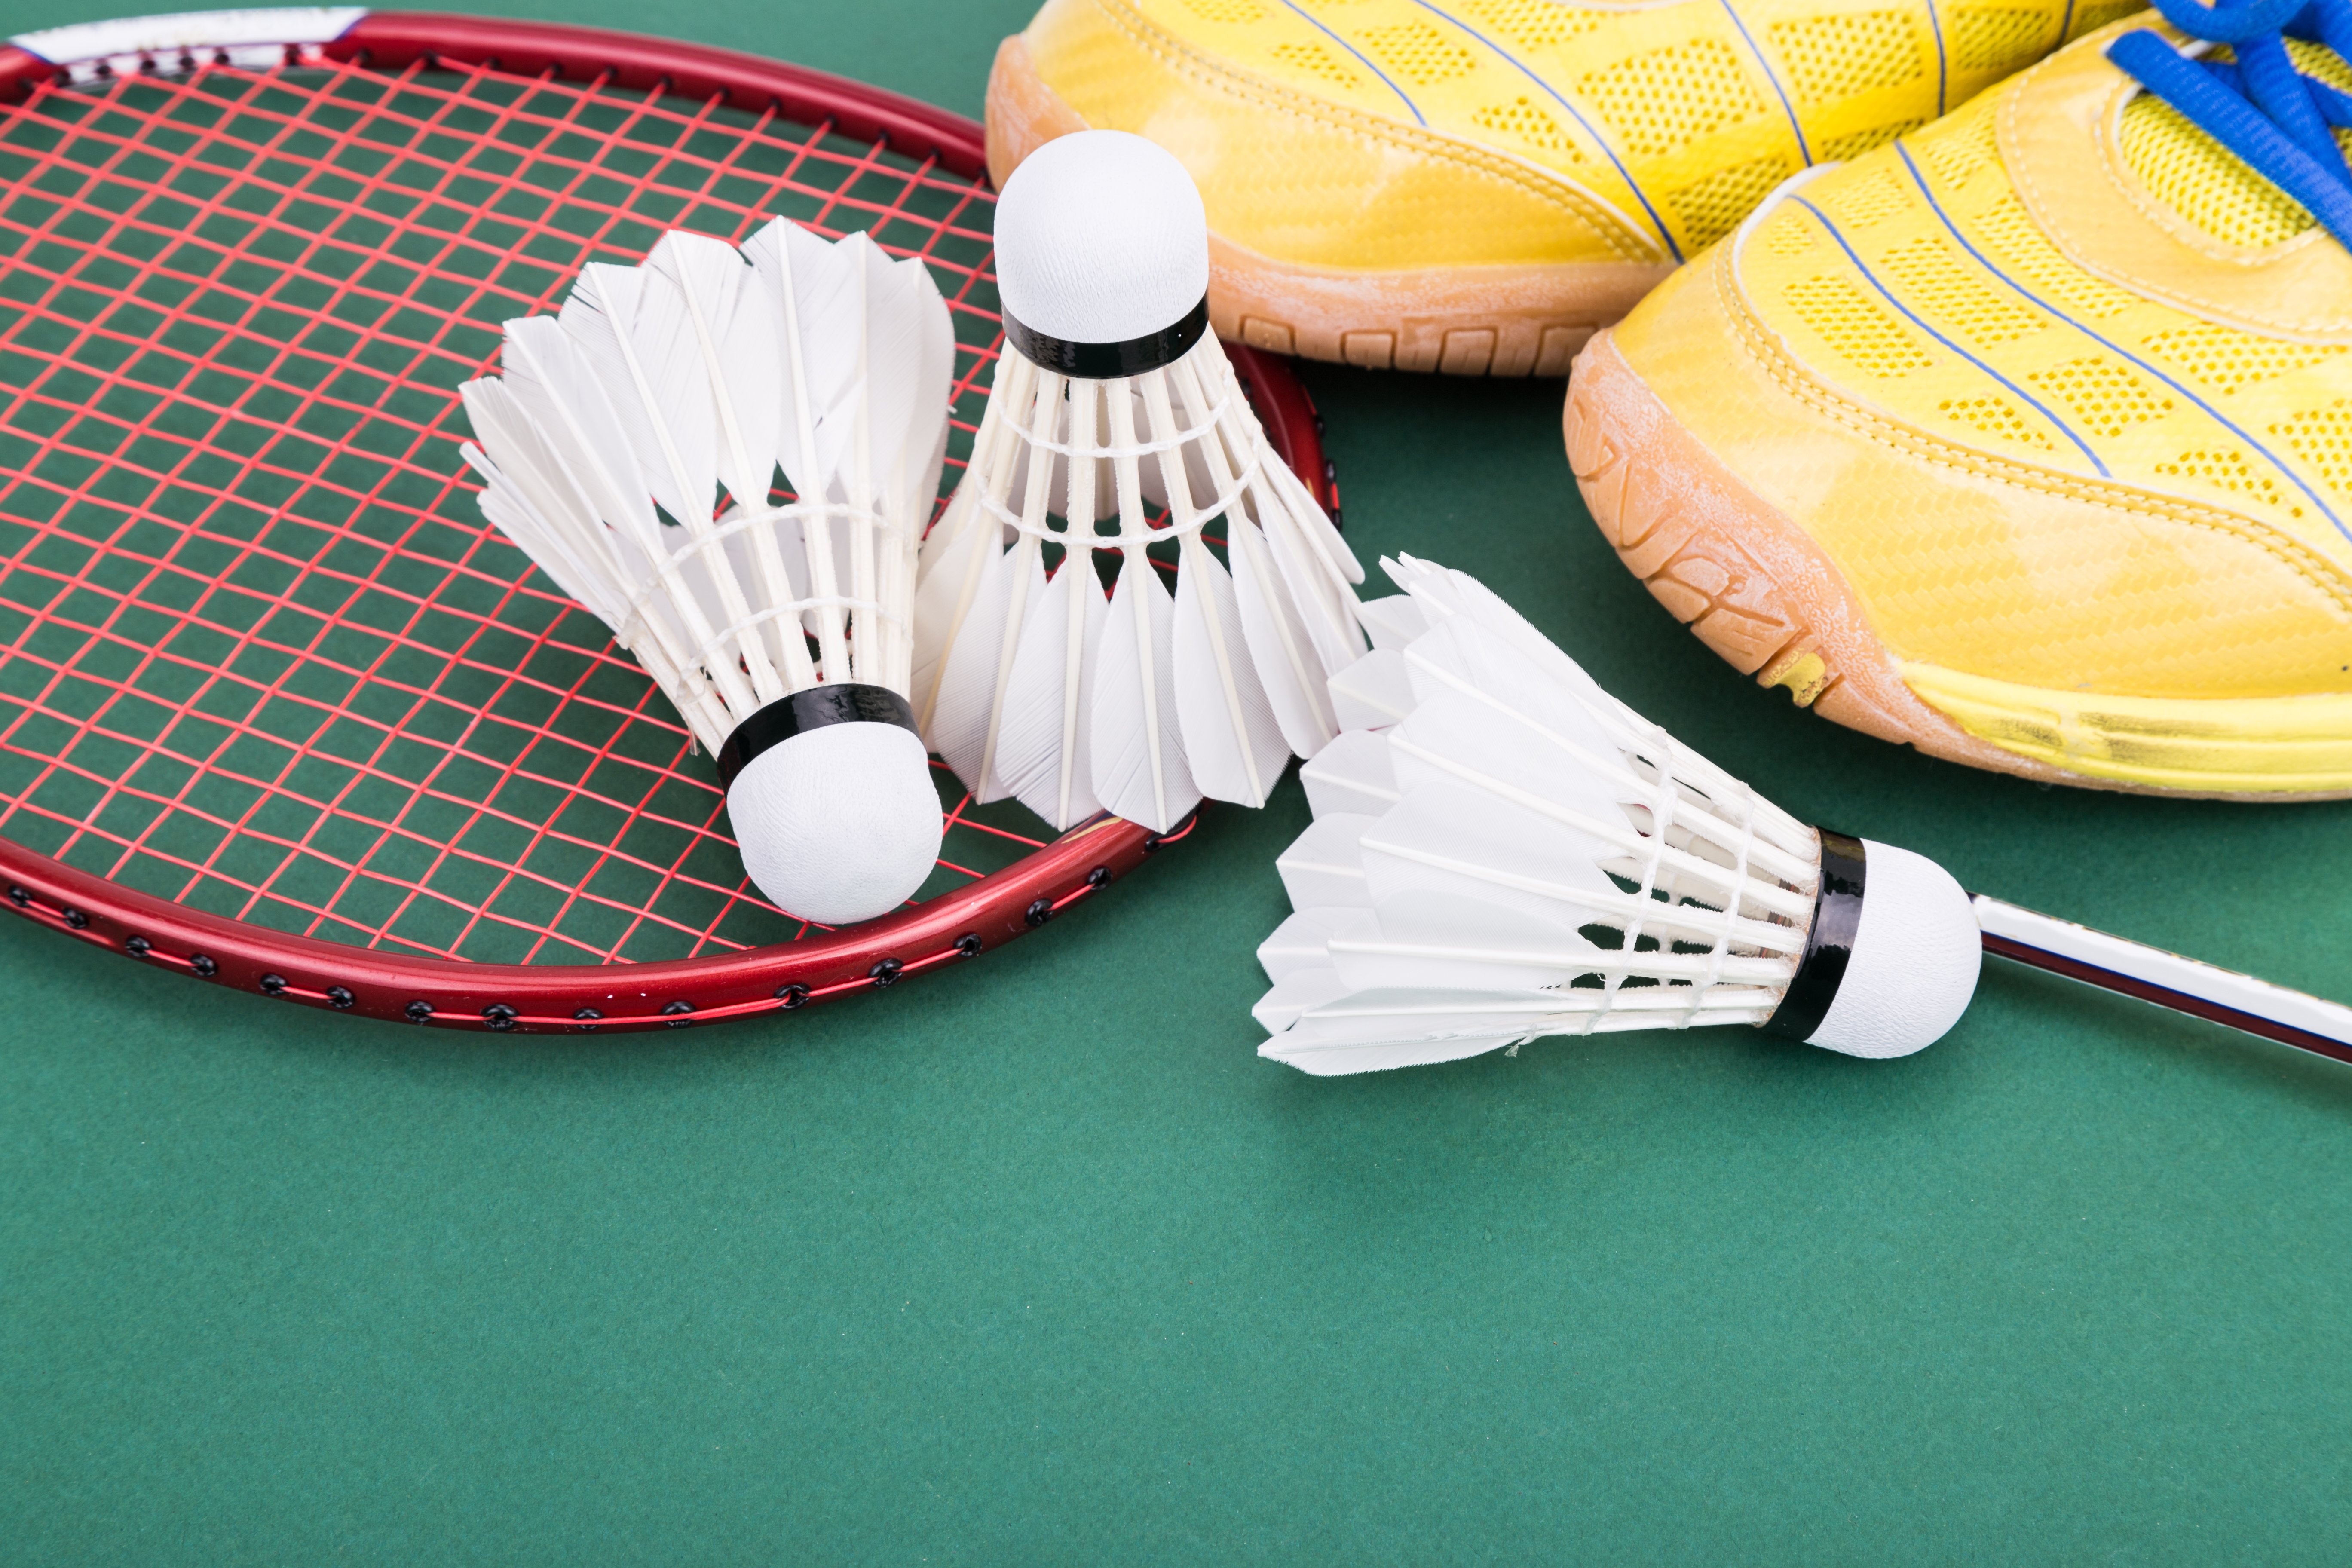 three-badminton-shuttlecock-with-racket-and-shoes-2021-09-01-20-56-06-utc